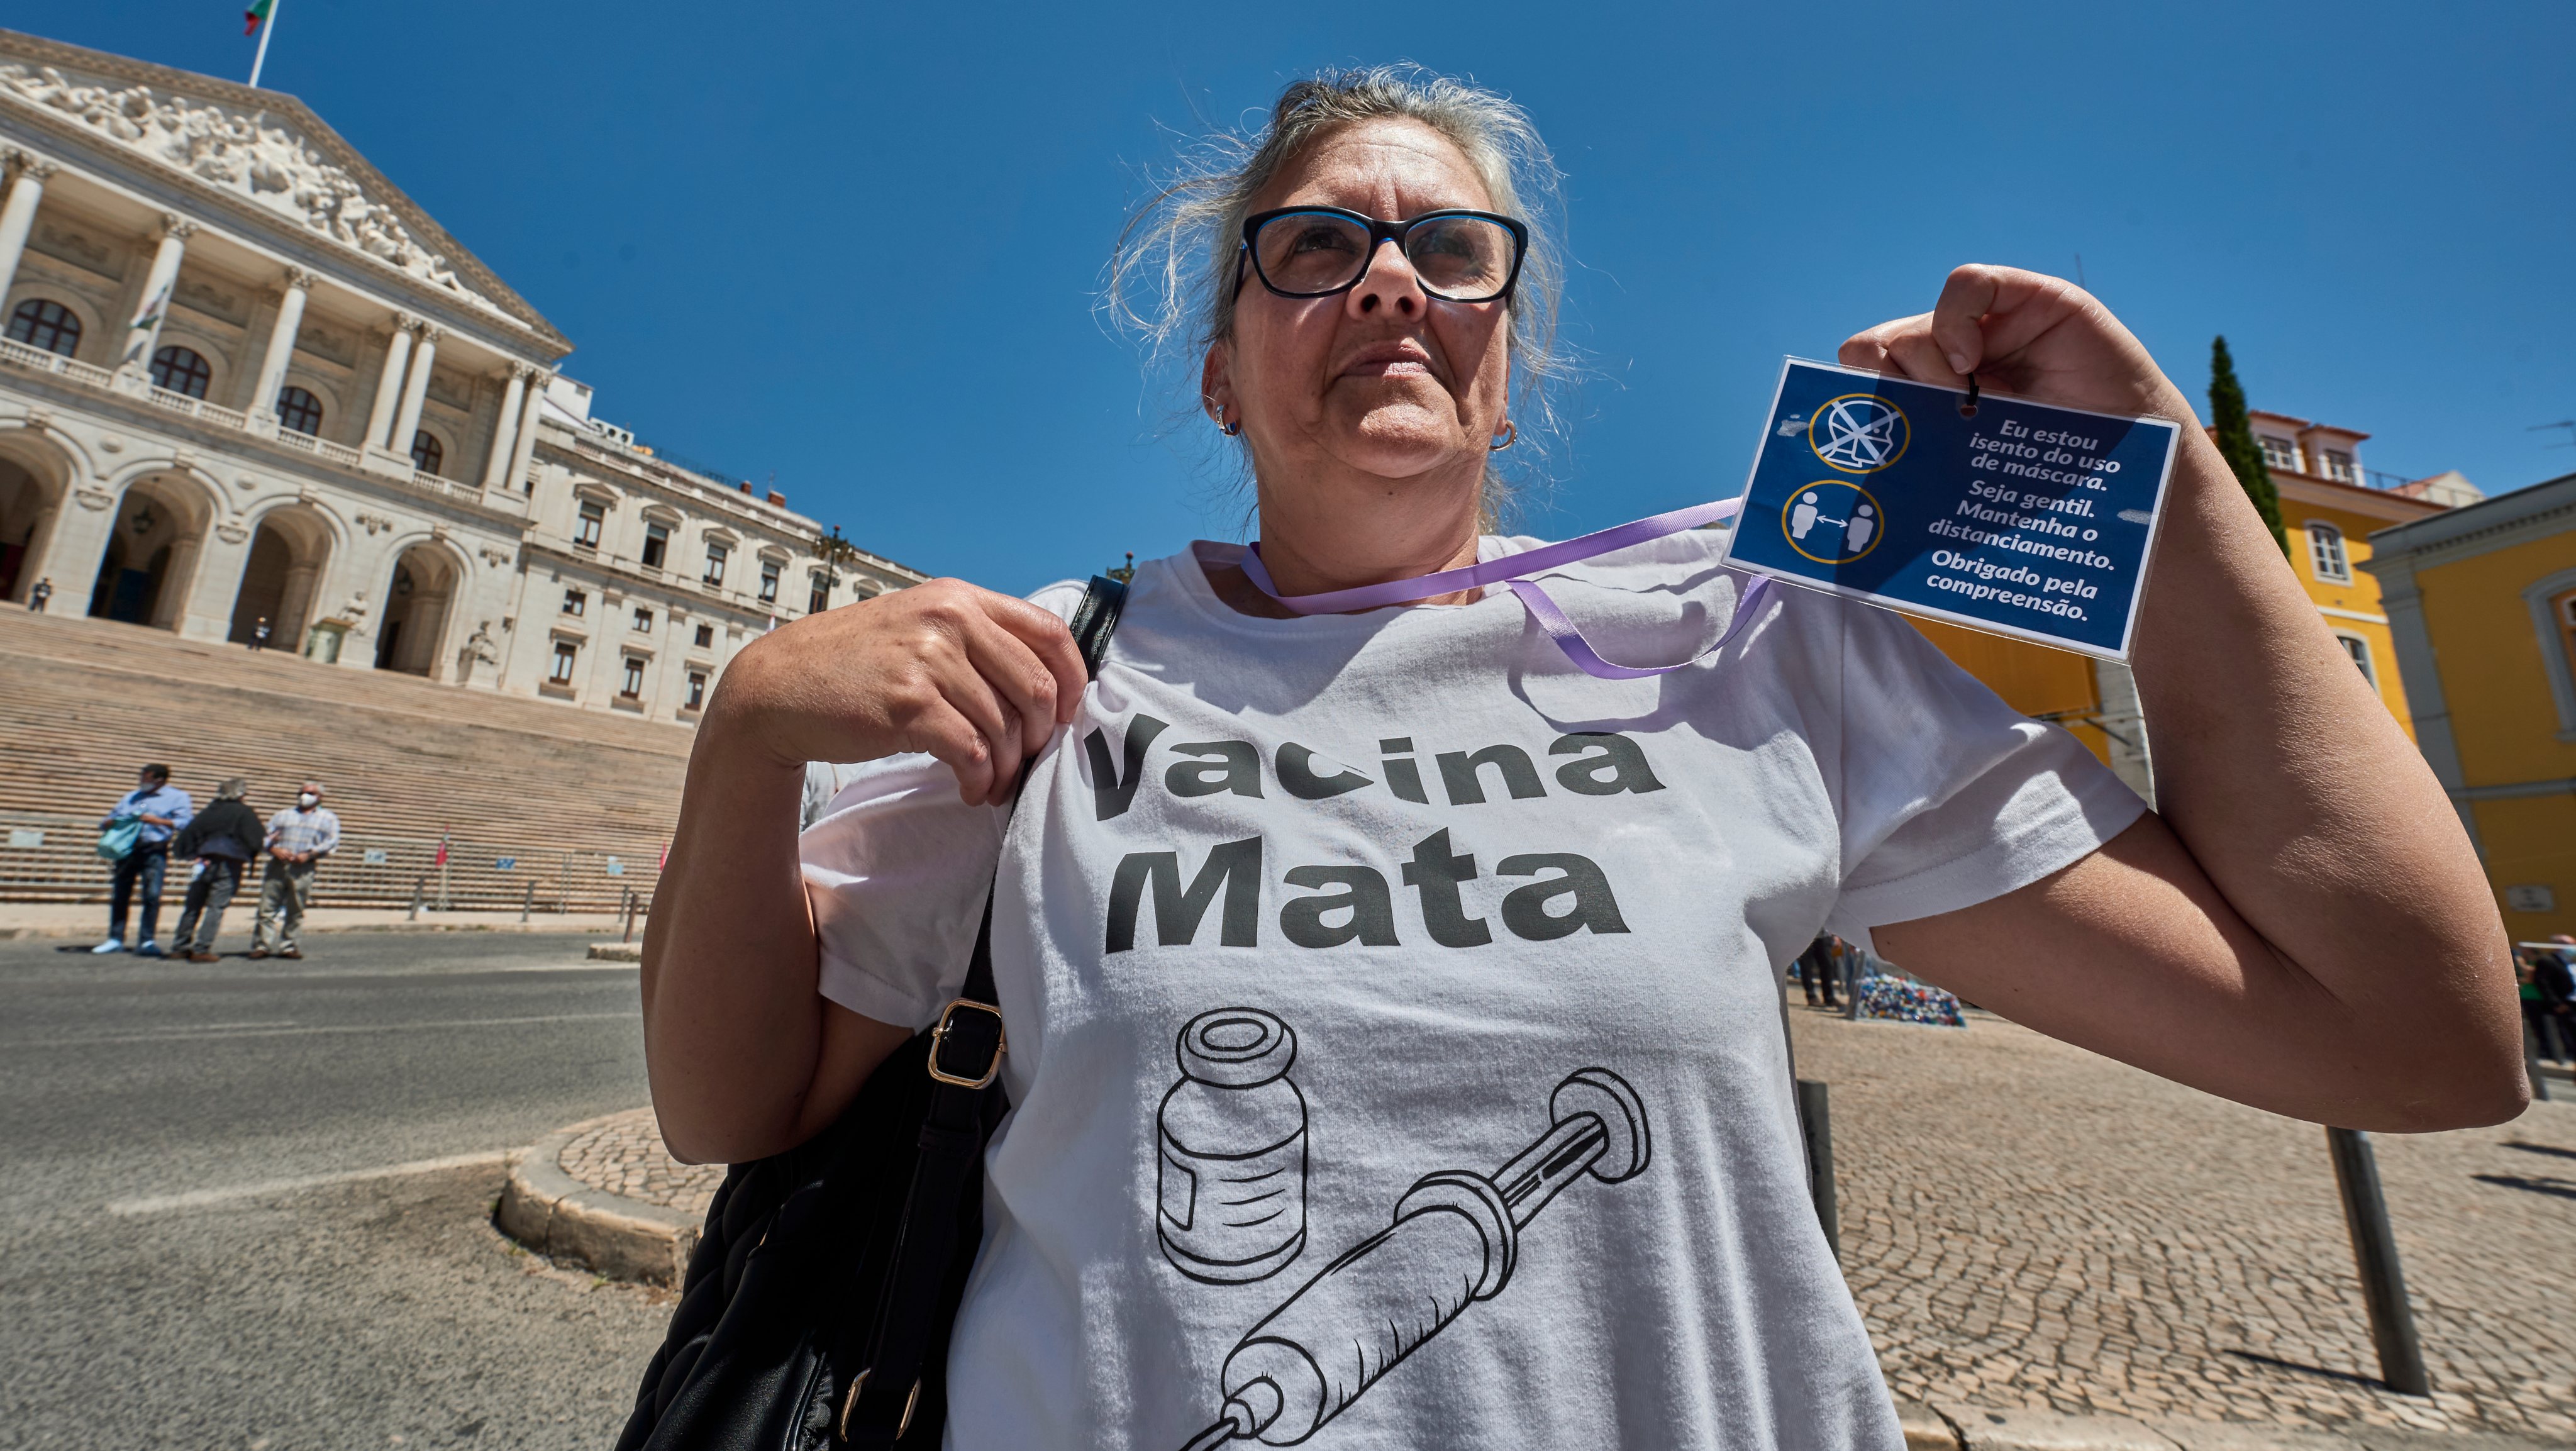 Anti-Vaccine Activists Protest Against Restrictions Imposed By The Government in Portugal